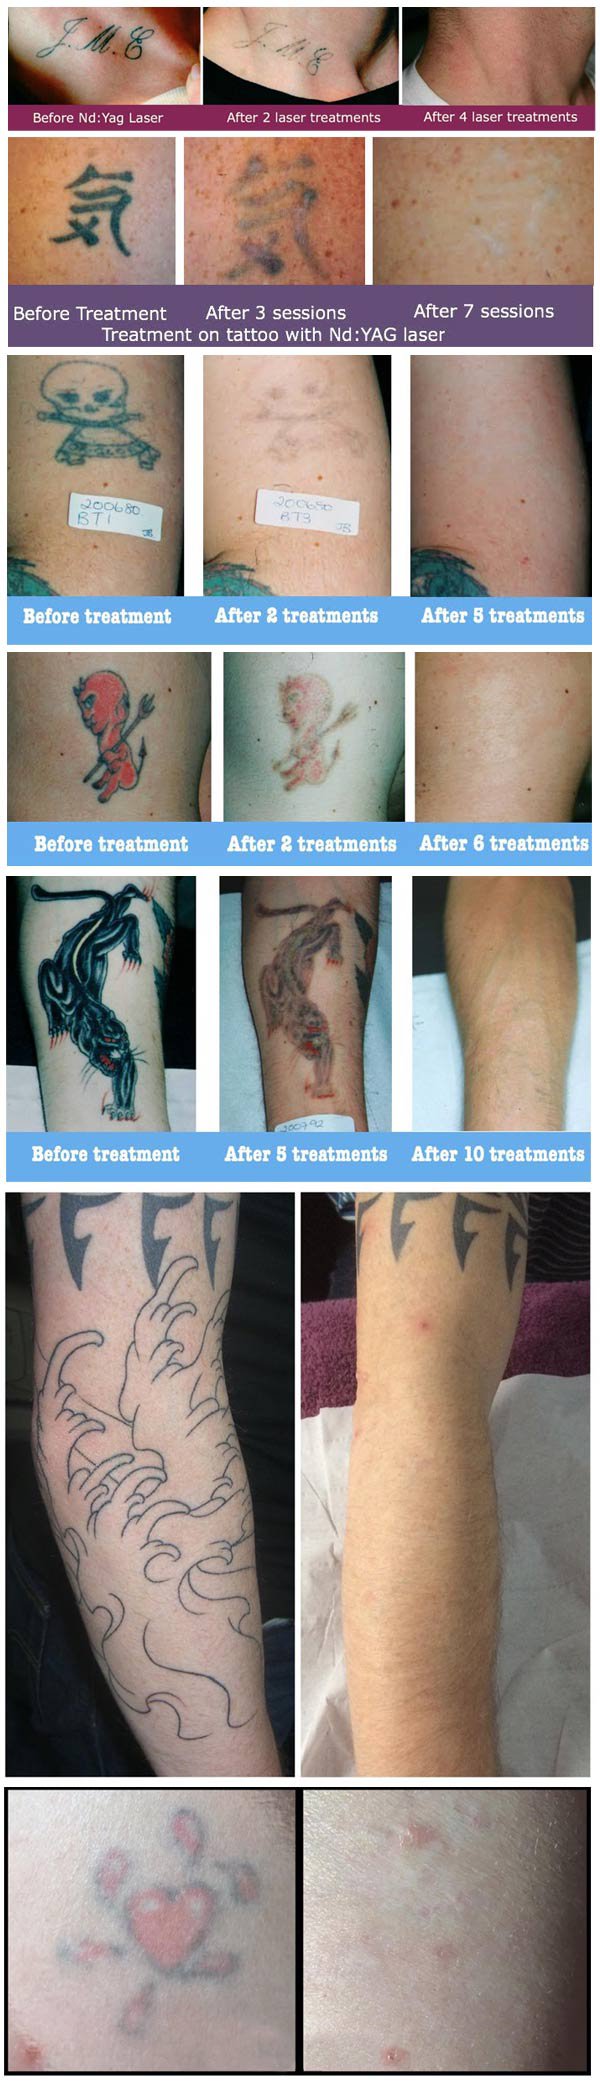 LASER TATTOO REMOVAL Before  After Best Laser COST PAIN and WHY Im  removing them  YouTube